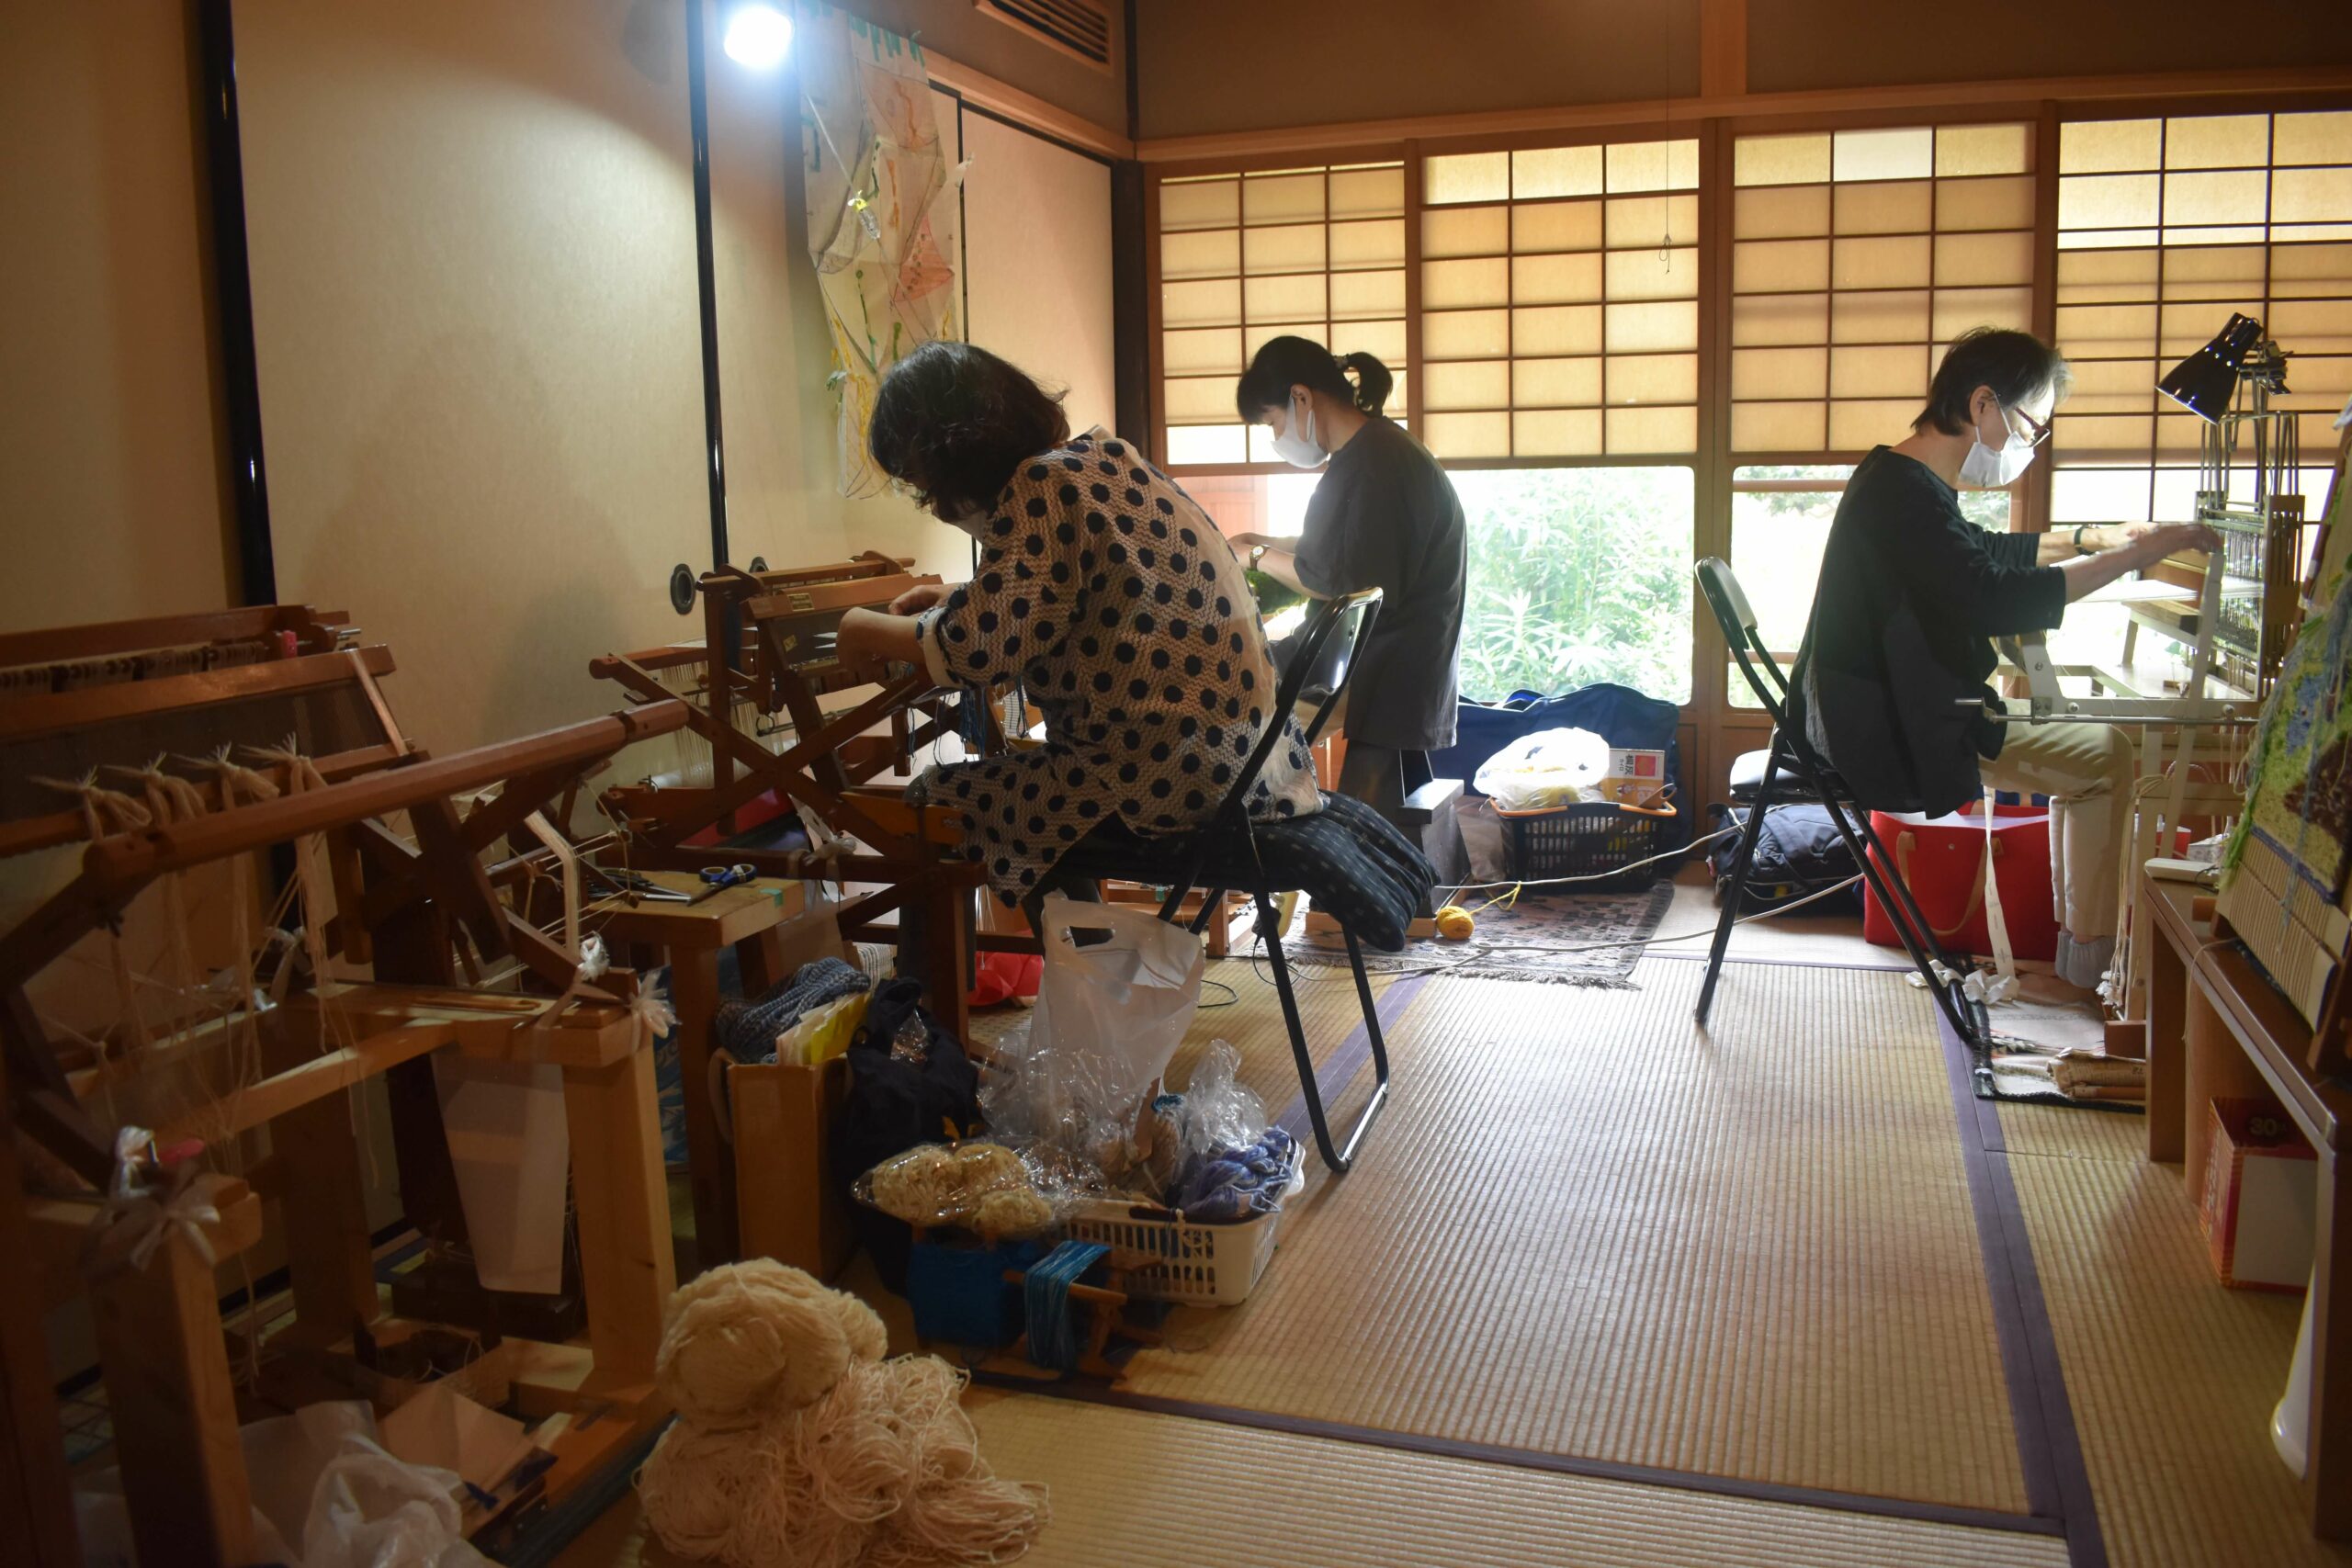 photoMembers at work in the handweaving class